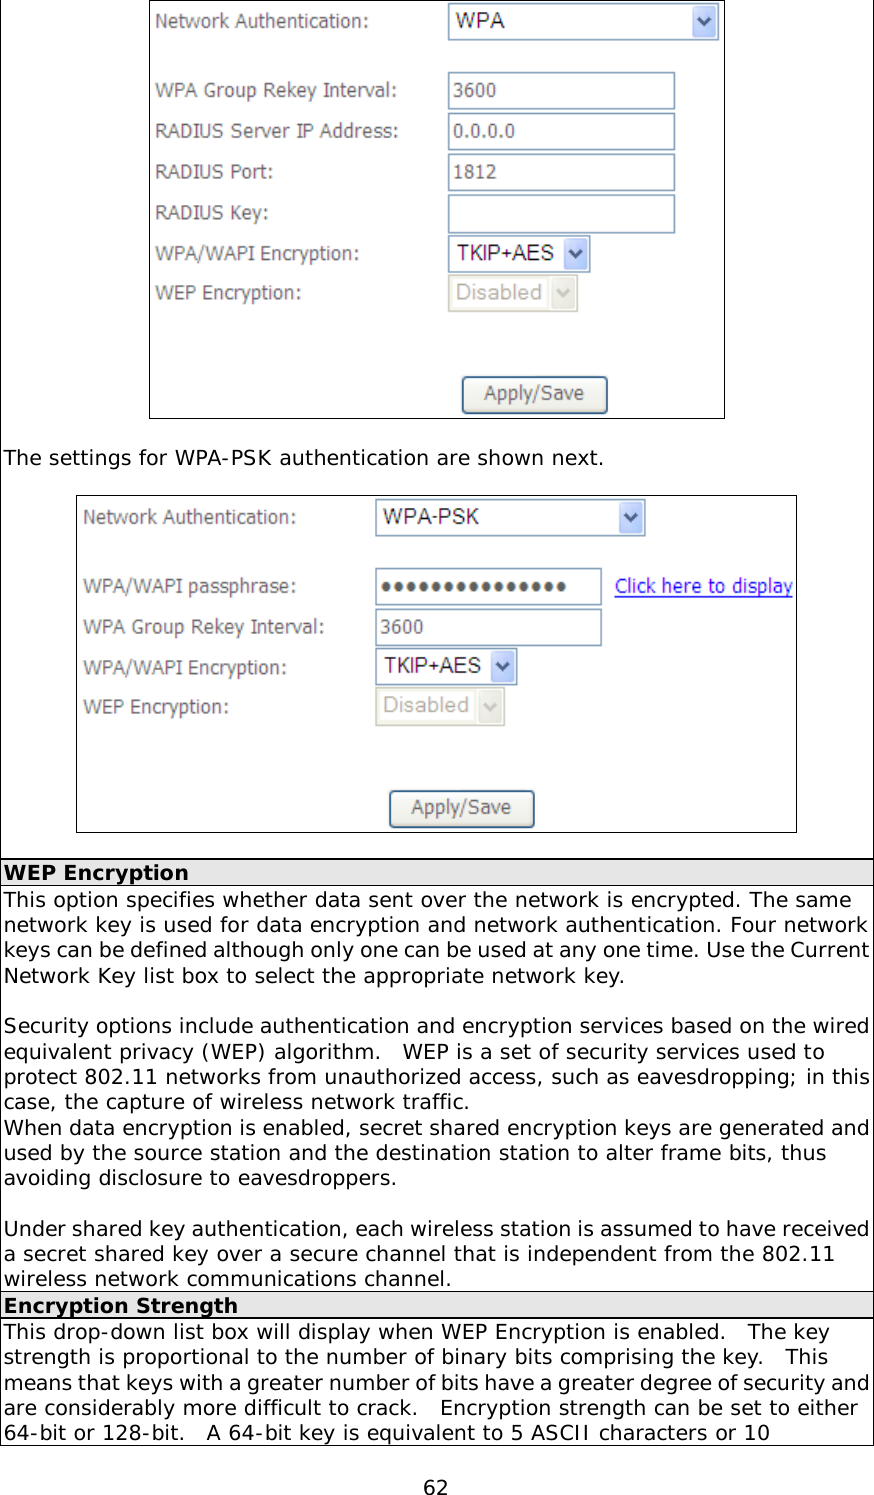  62   The settings for WPA-PSK authentication are shown next.    WEP Encryption This option specifies whether data sent over the network is encrypted. The same network key is used for data encryption and network authentication. Four network keys can be defined although only one can be used at any one time. Use the Current Network Key list box to select the appropriate network key.   Security options include authentication and encryption services based on the wired equivalent privacy (WEP) algorithm.  WEP is a set of security services used to protect 802.11 networks from unauthorized access, such as eavesdropping; in this case, the capture of wireless network traffic.   When data encryption is enabled, secret shared encryption keys are generated and used by the source station and the destination station to alter frame bits, thus avoiding disclosure to eavesdroppers.  Under shared key authentication, each wireless station is assumed to have received a secret shared key over a secure channel that is independent from the 802.11 wireless network communications channel. Encryption Strength This drop-down list box will display when WEP Encryption is enabled.  The key strength is proportional to the number of binary bits comprising the key.  This means that keys with a greater number of bits have a greater degree of security and are considerably more difficult to crack.  Encryption strength can be set to either 64-bit or 128-bit.  A 64-bit key is equivalent to 5 ASCII characters or 10 